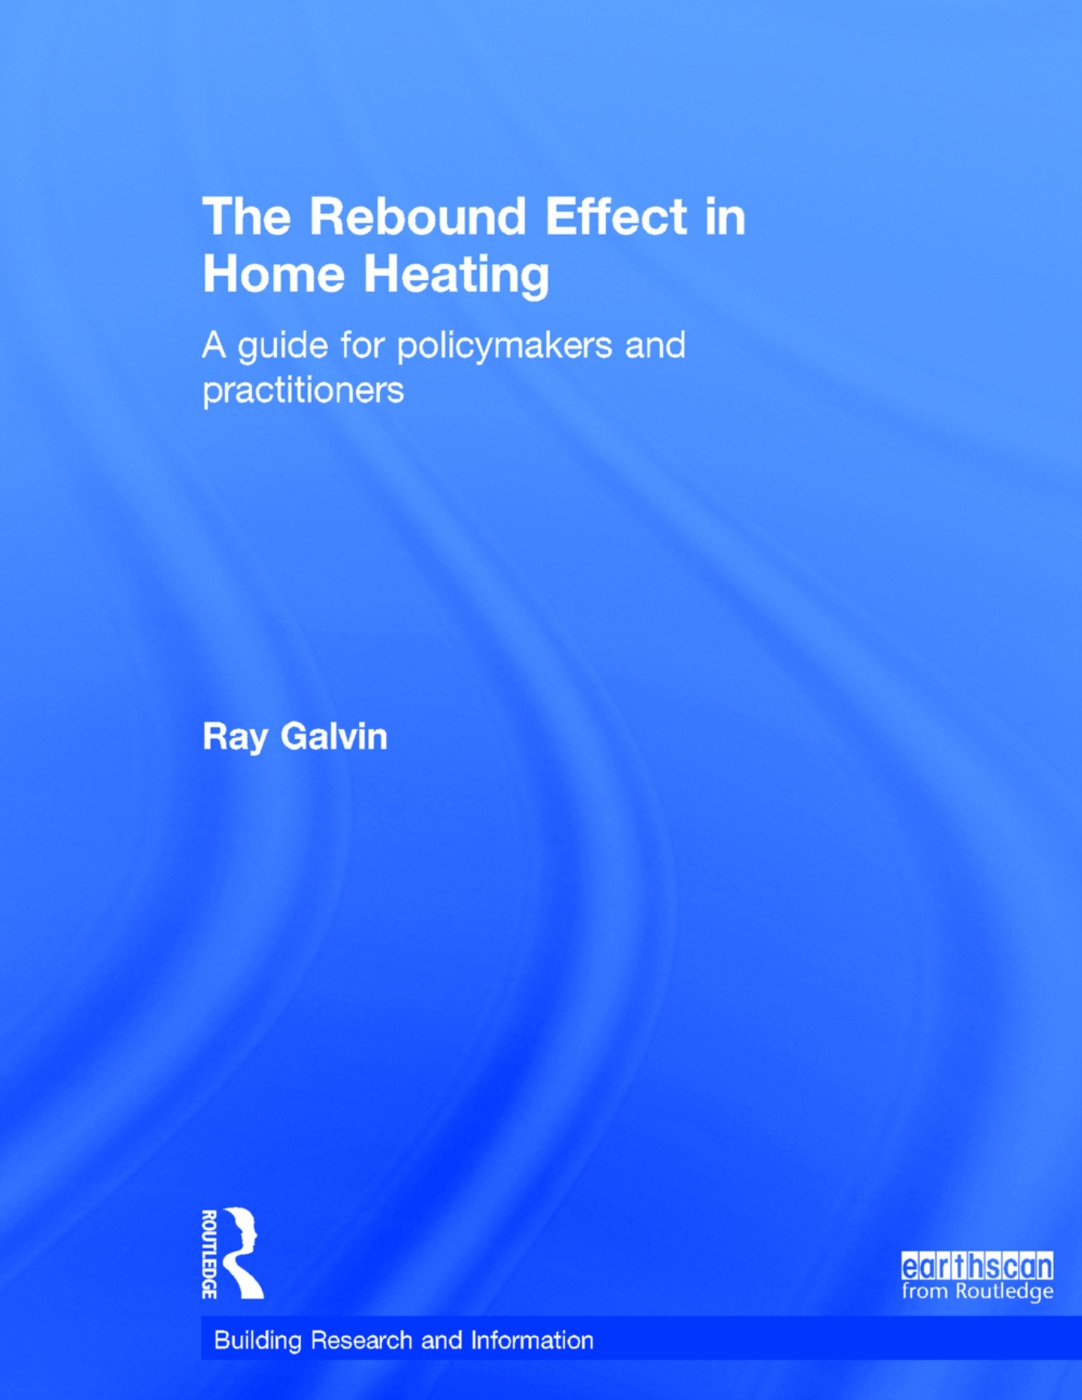 The Rebound Effect in Home Heating: A Guide for Policymakers and Practitioners